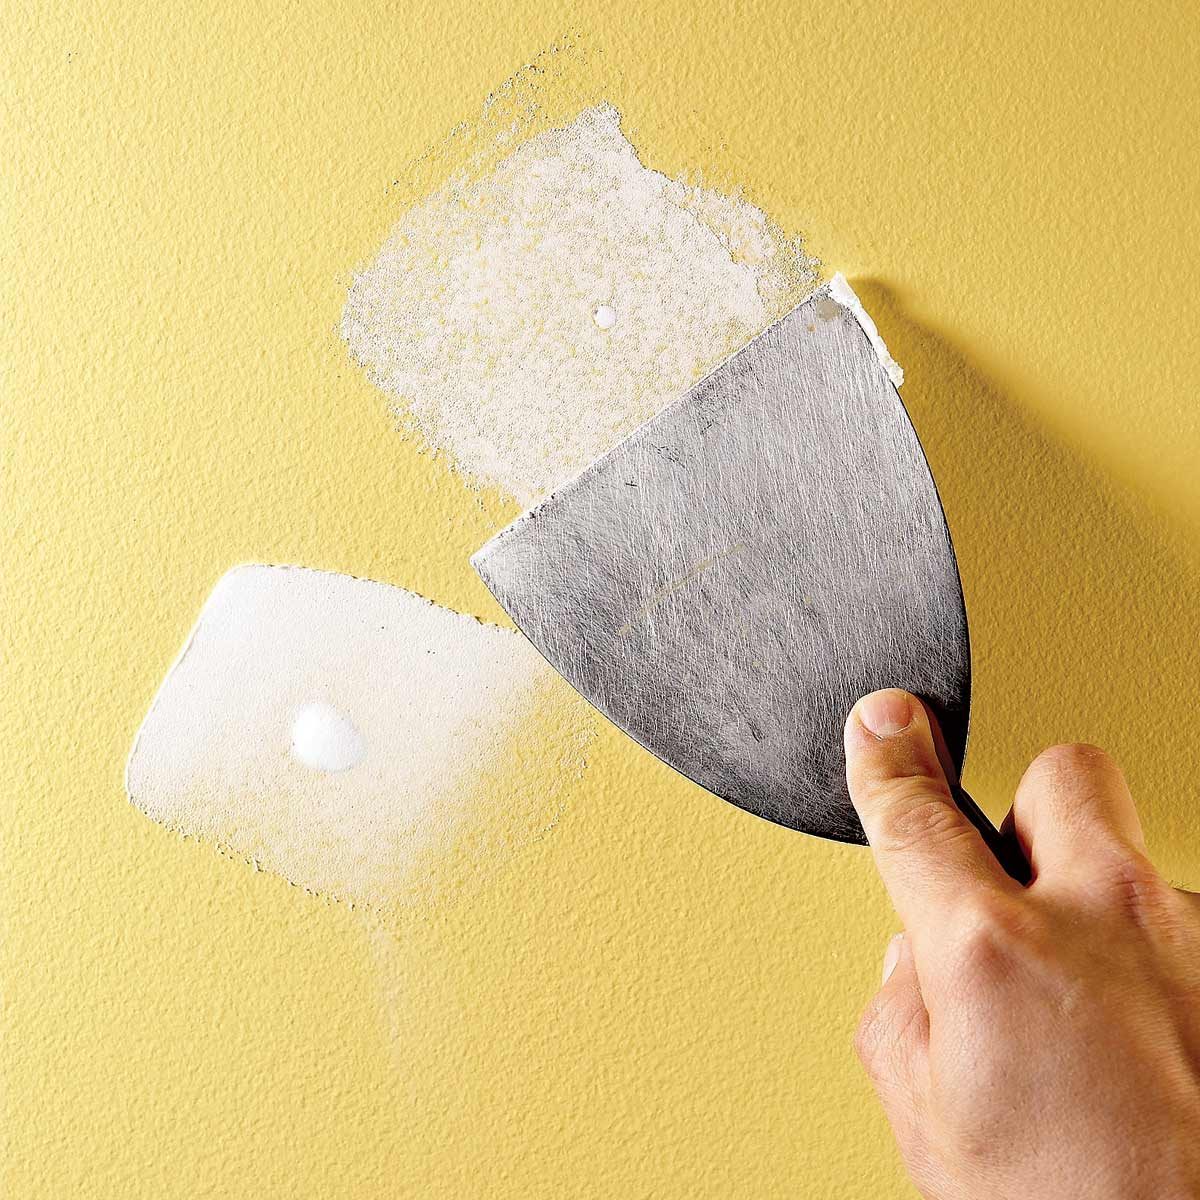 How To Repair A Hole In Sheetrock Wall How To Patch Holes In Drywall